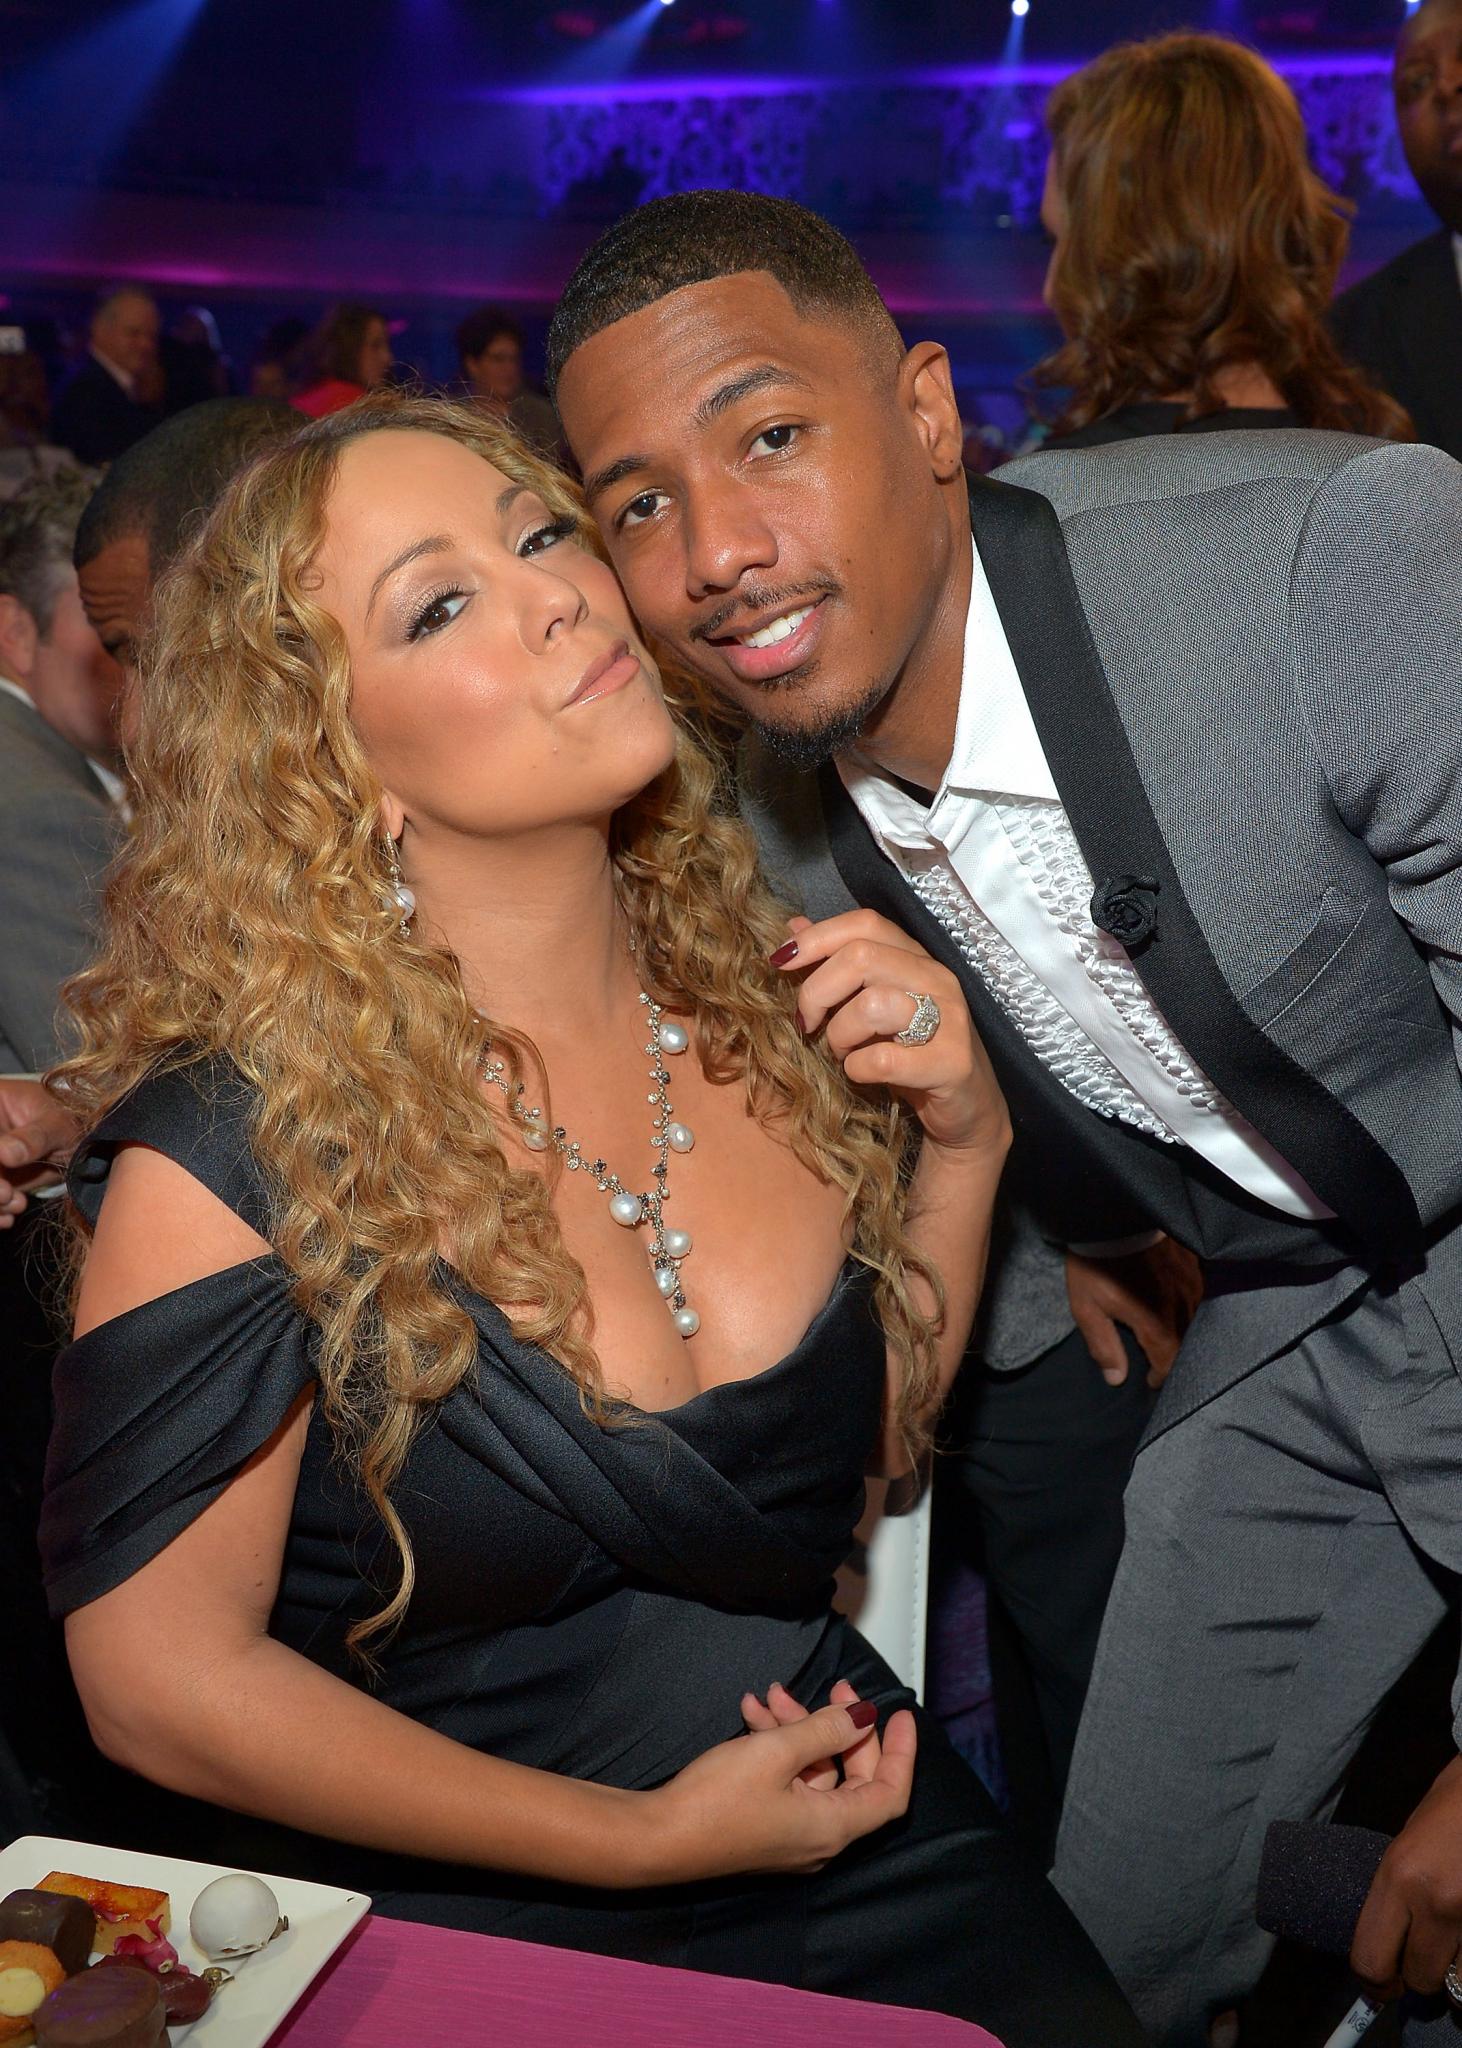 Mariah Carey and Nick Cannon In Tense Divorce Battle